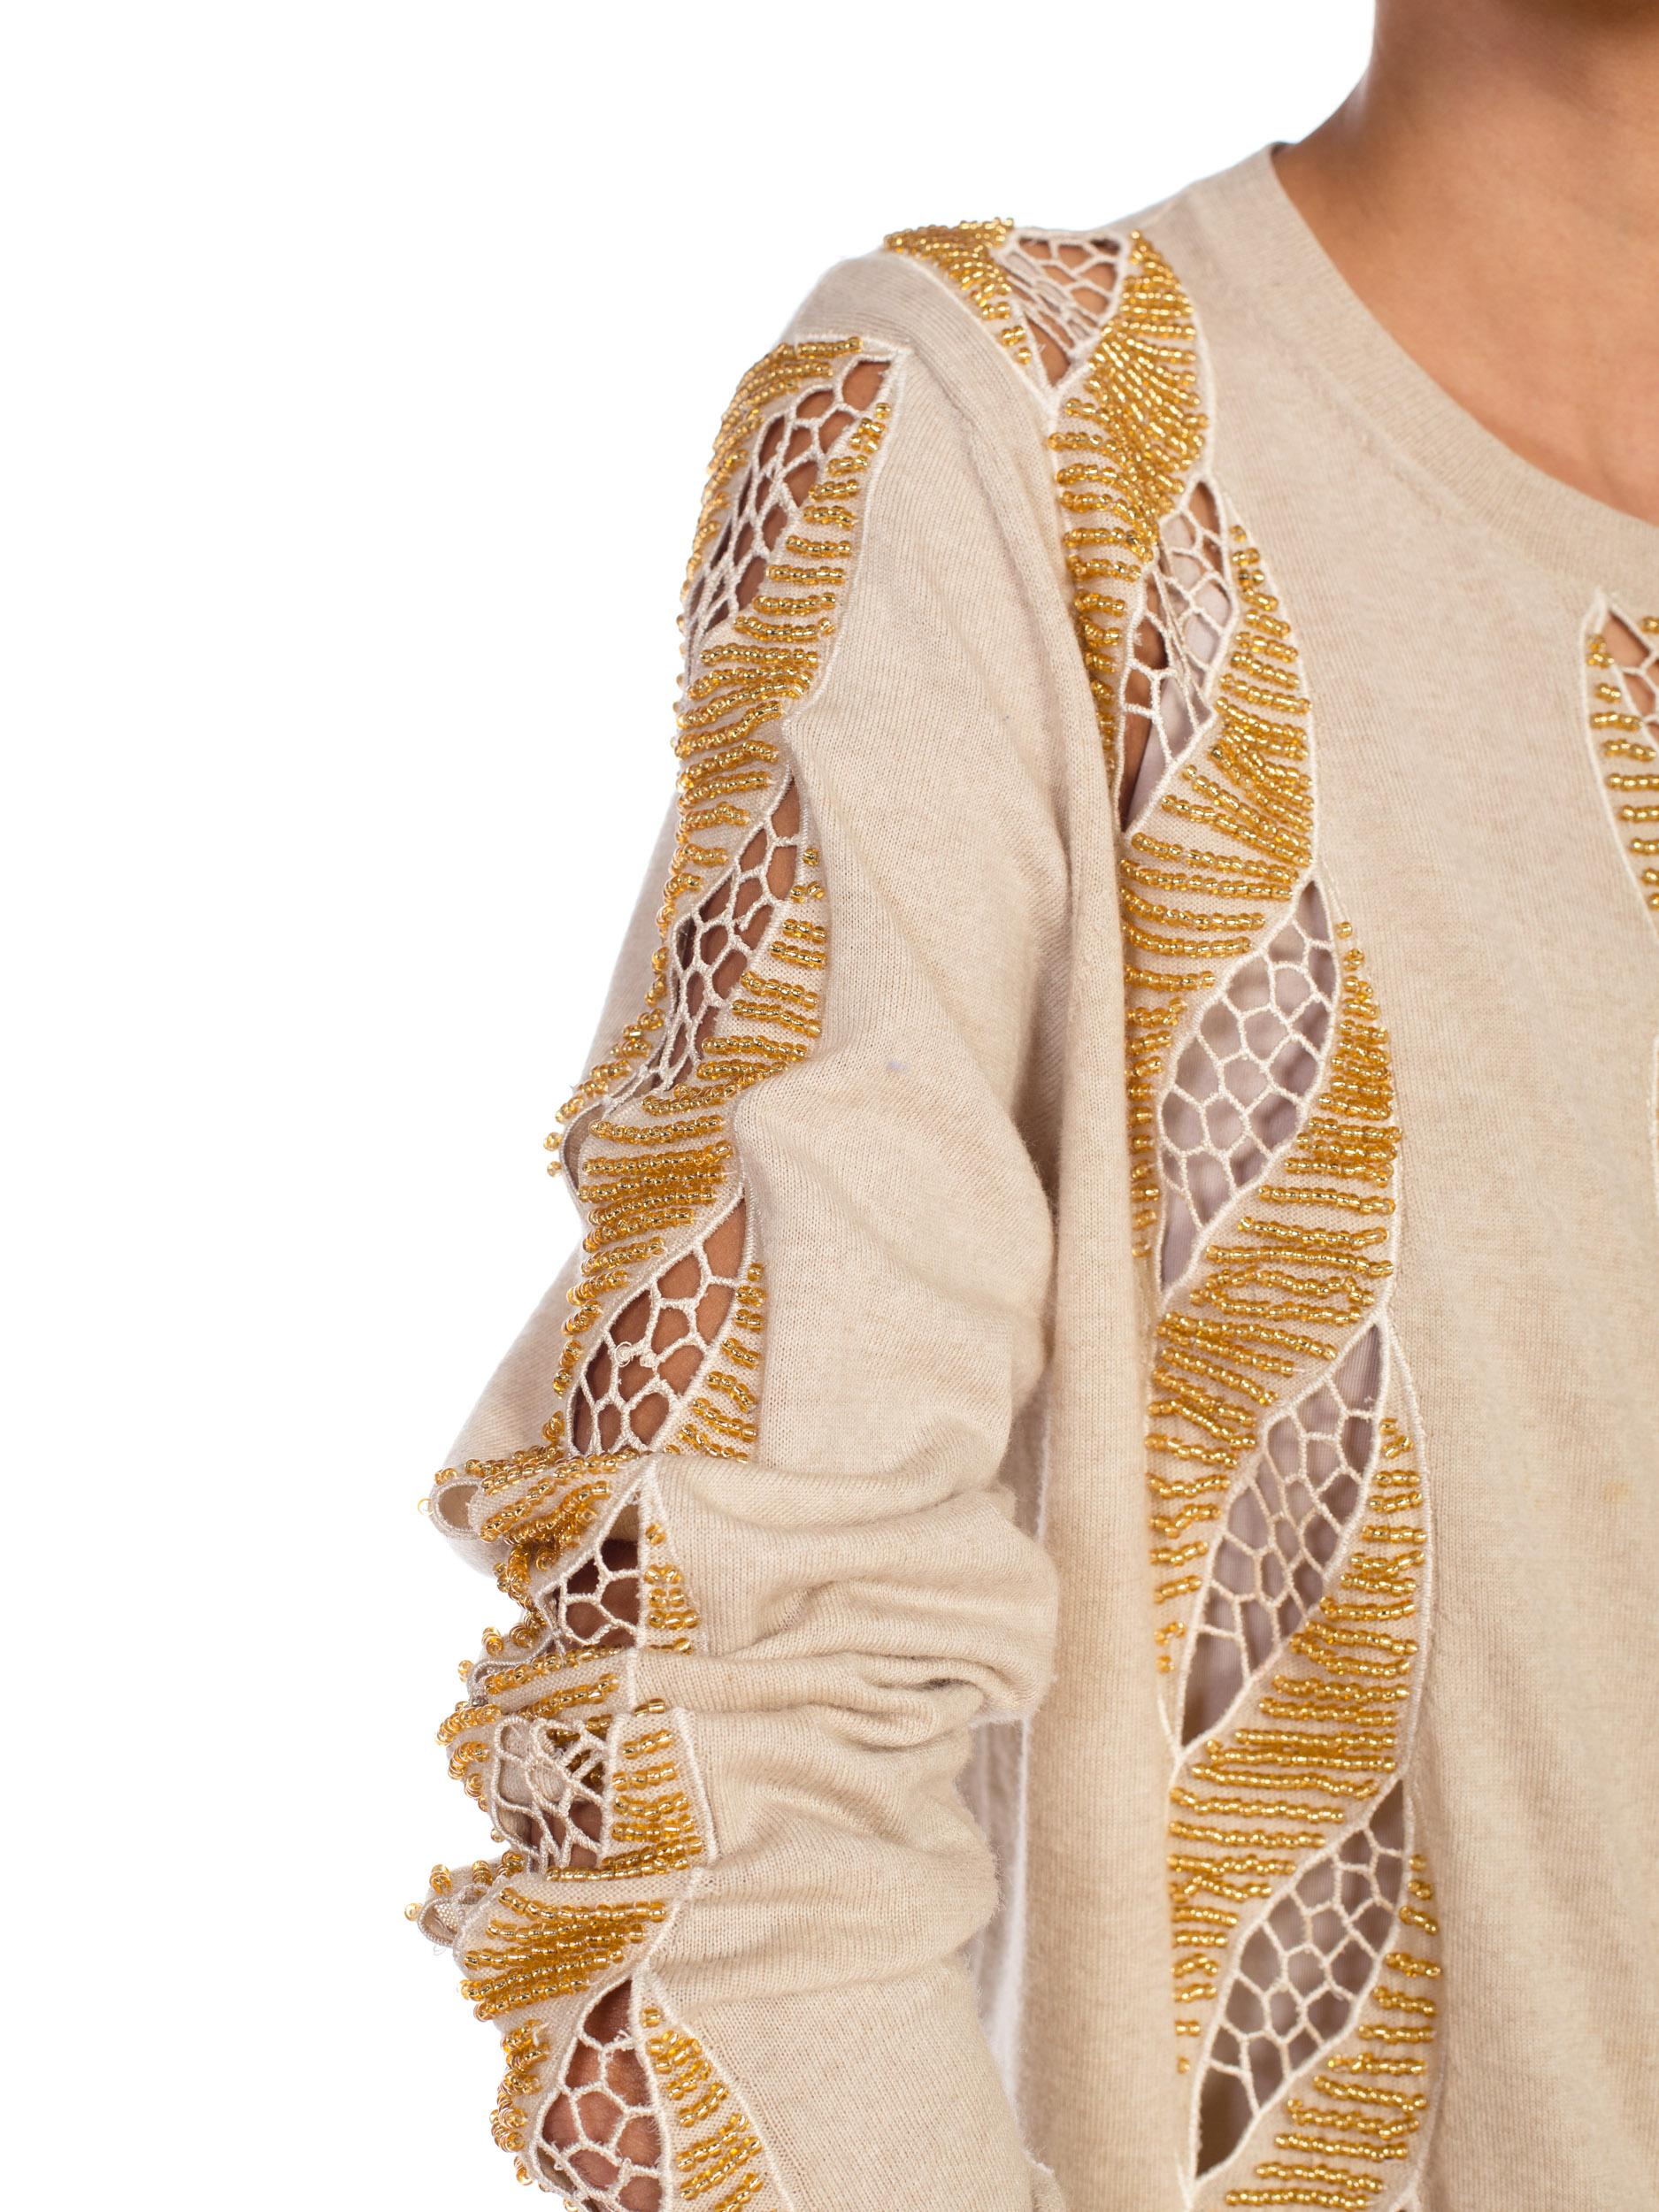 Dries Van Noten Lace Cut Out Gold Beaded Sweater  10